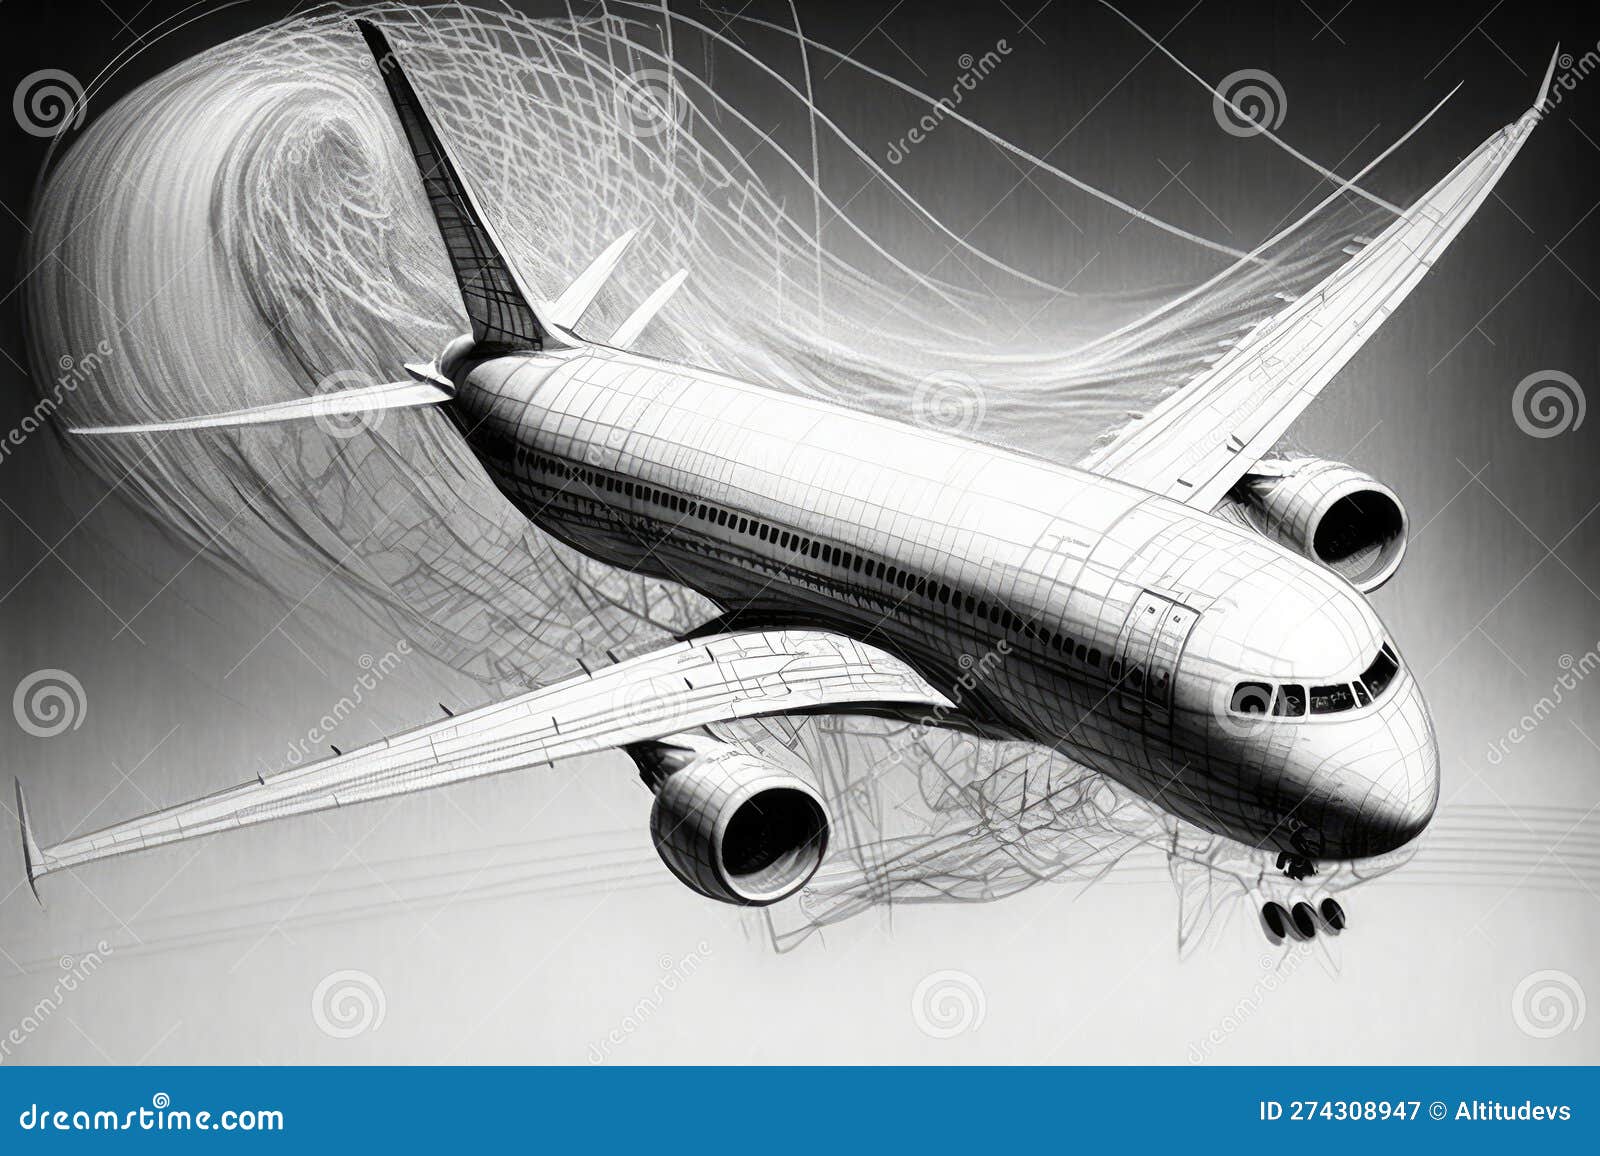 Aircraft  Spacecraft Conceptual Design Drawings  Pictures